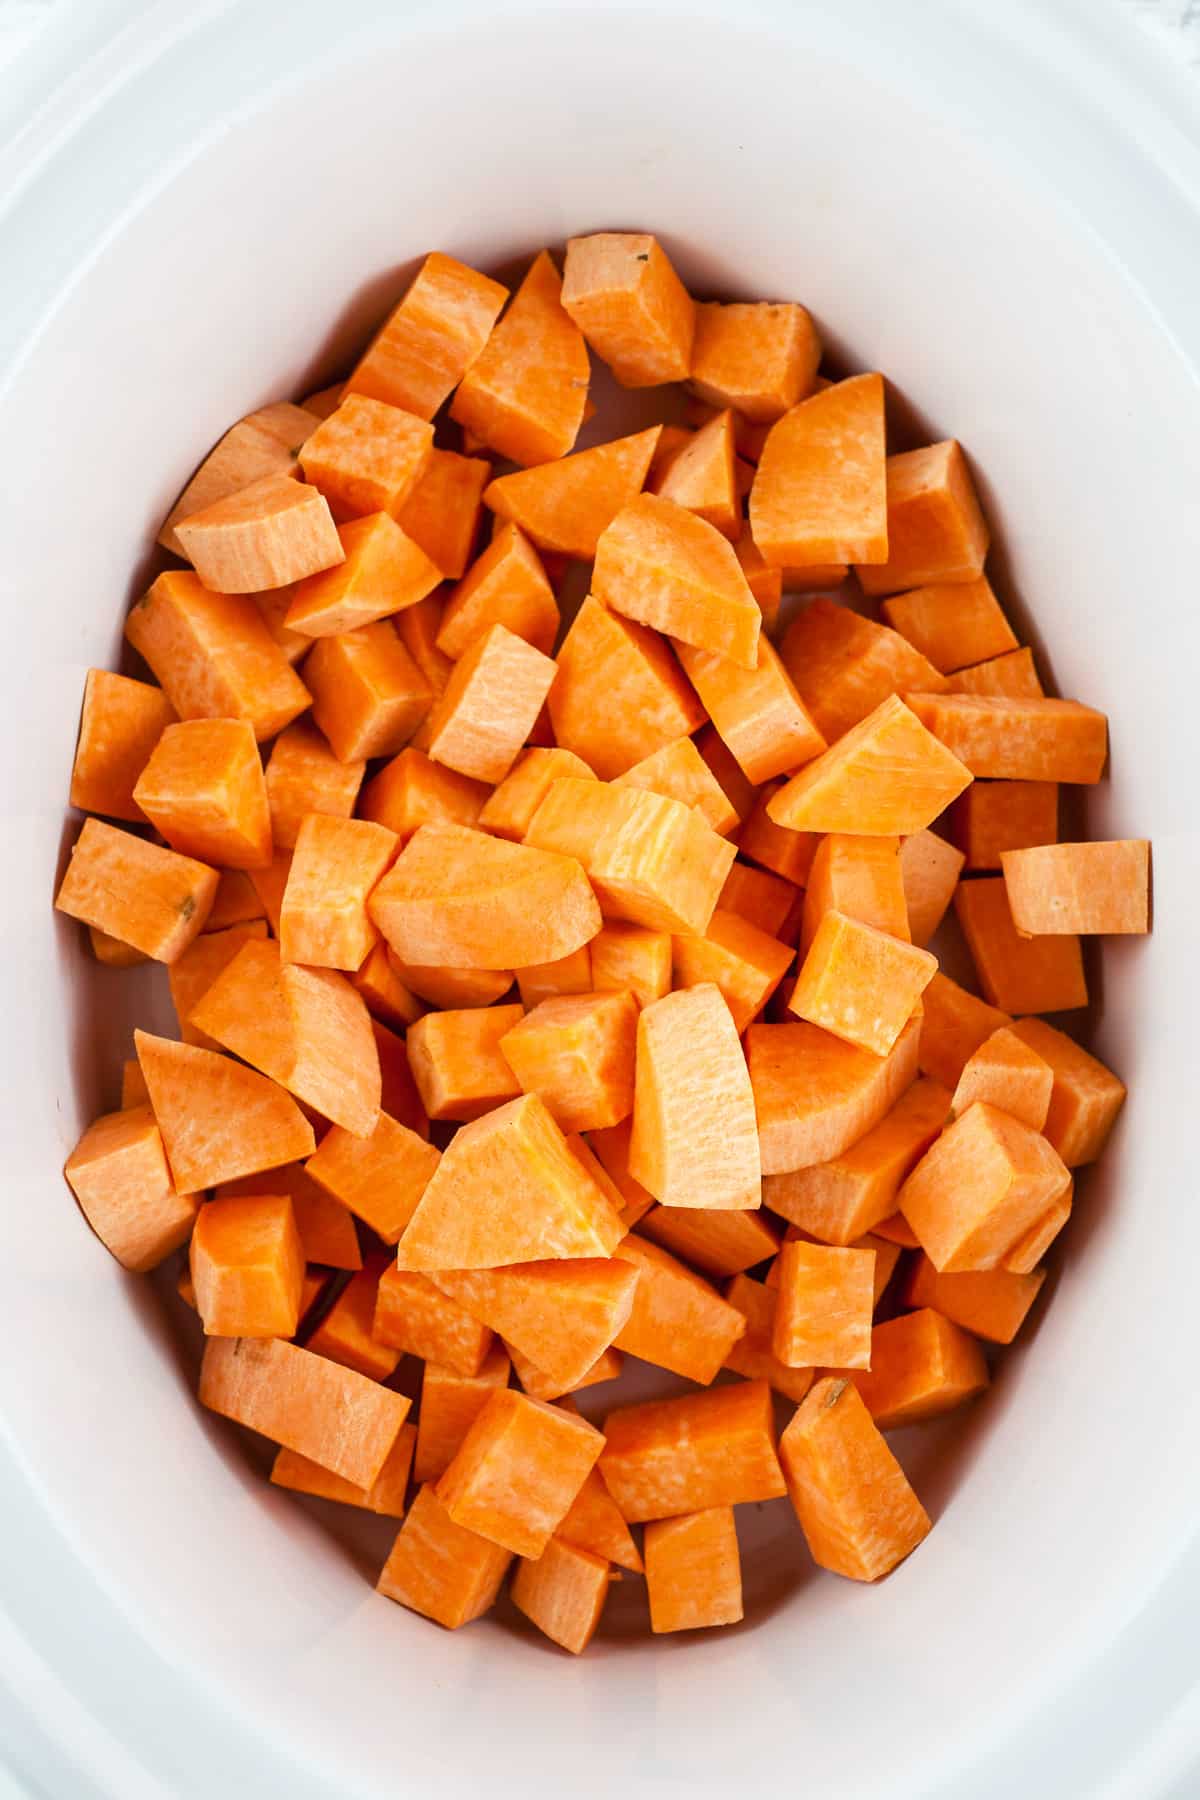 Diced sweet potatoes in slow cooker.